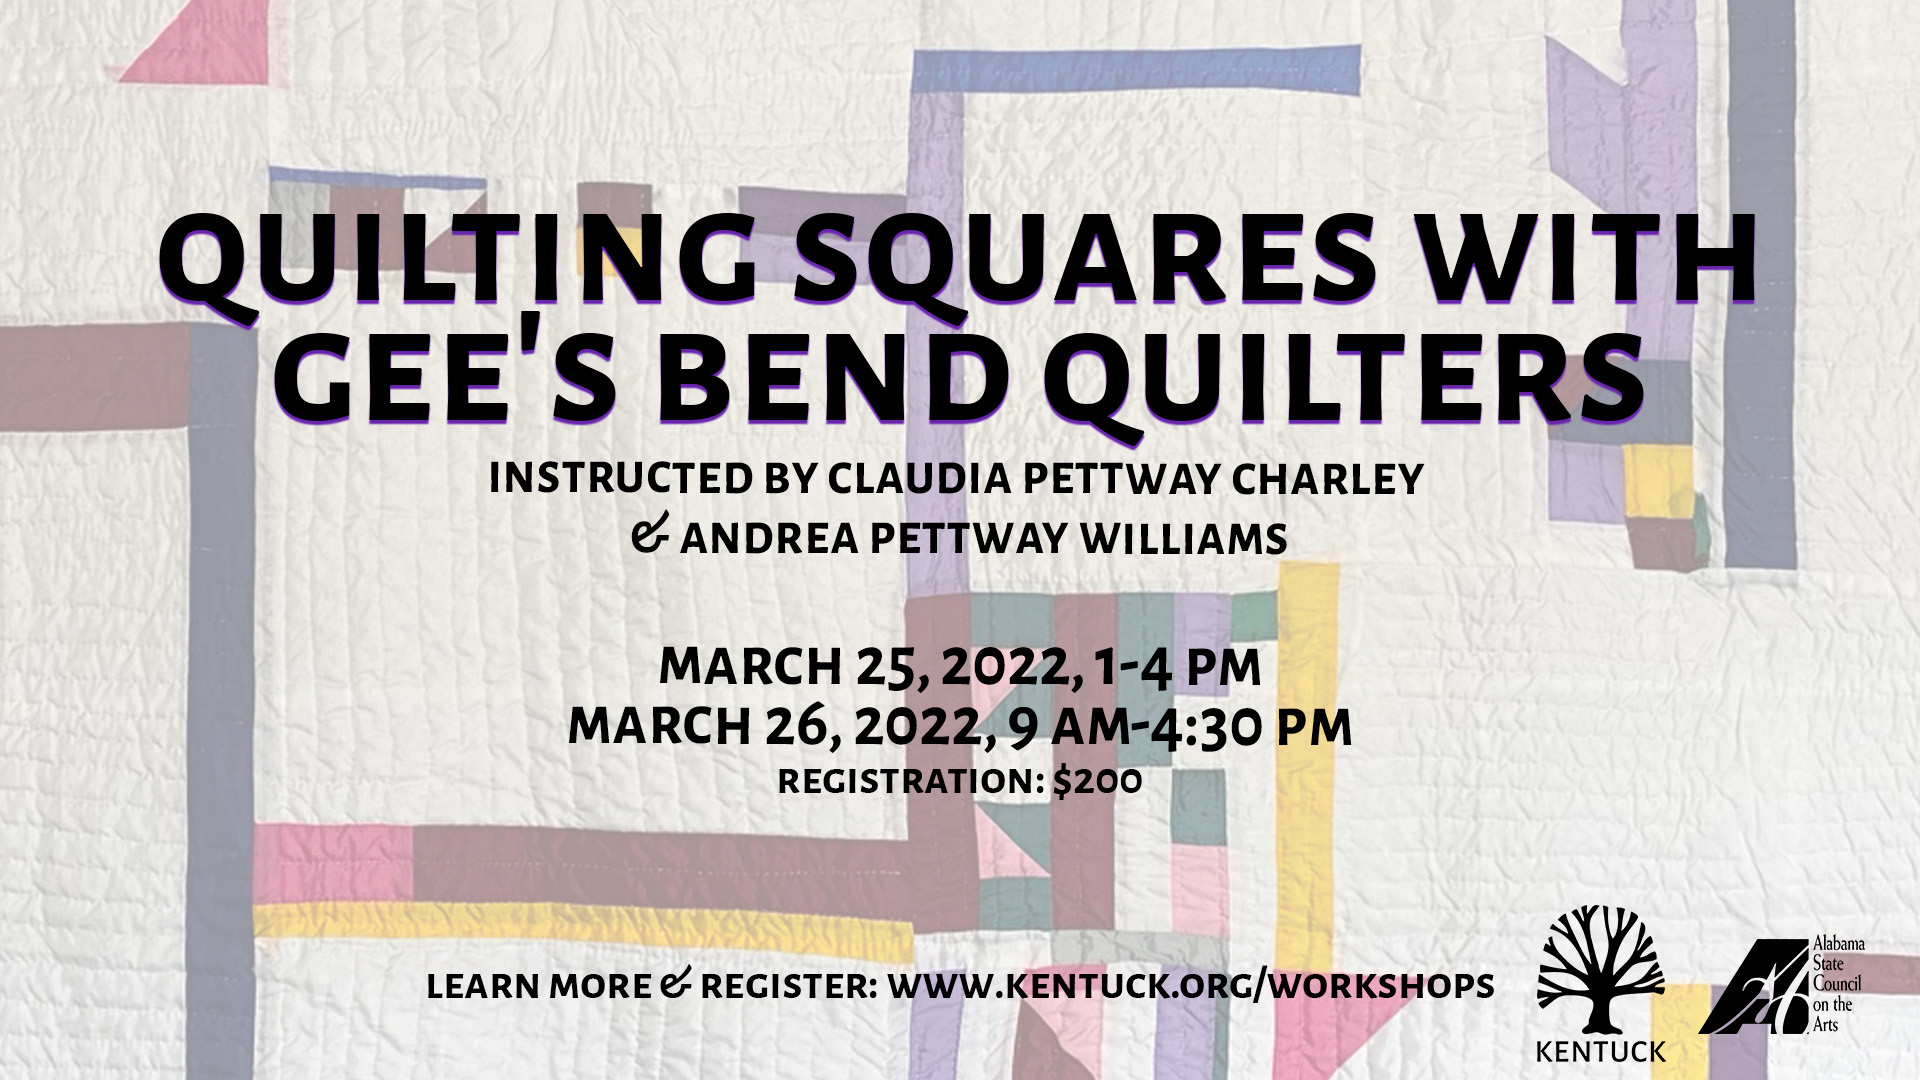 Quilting Squares with Gee's Bend Quilters